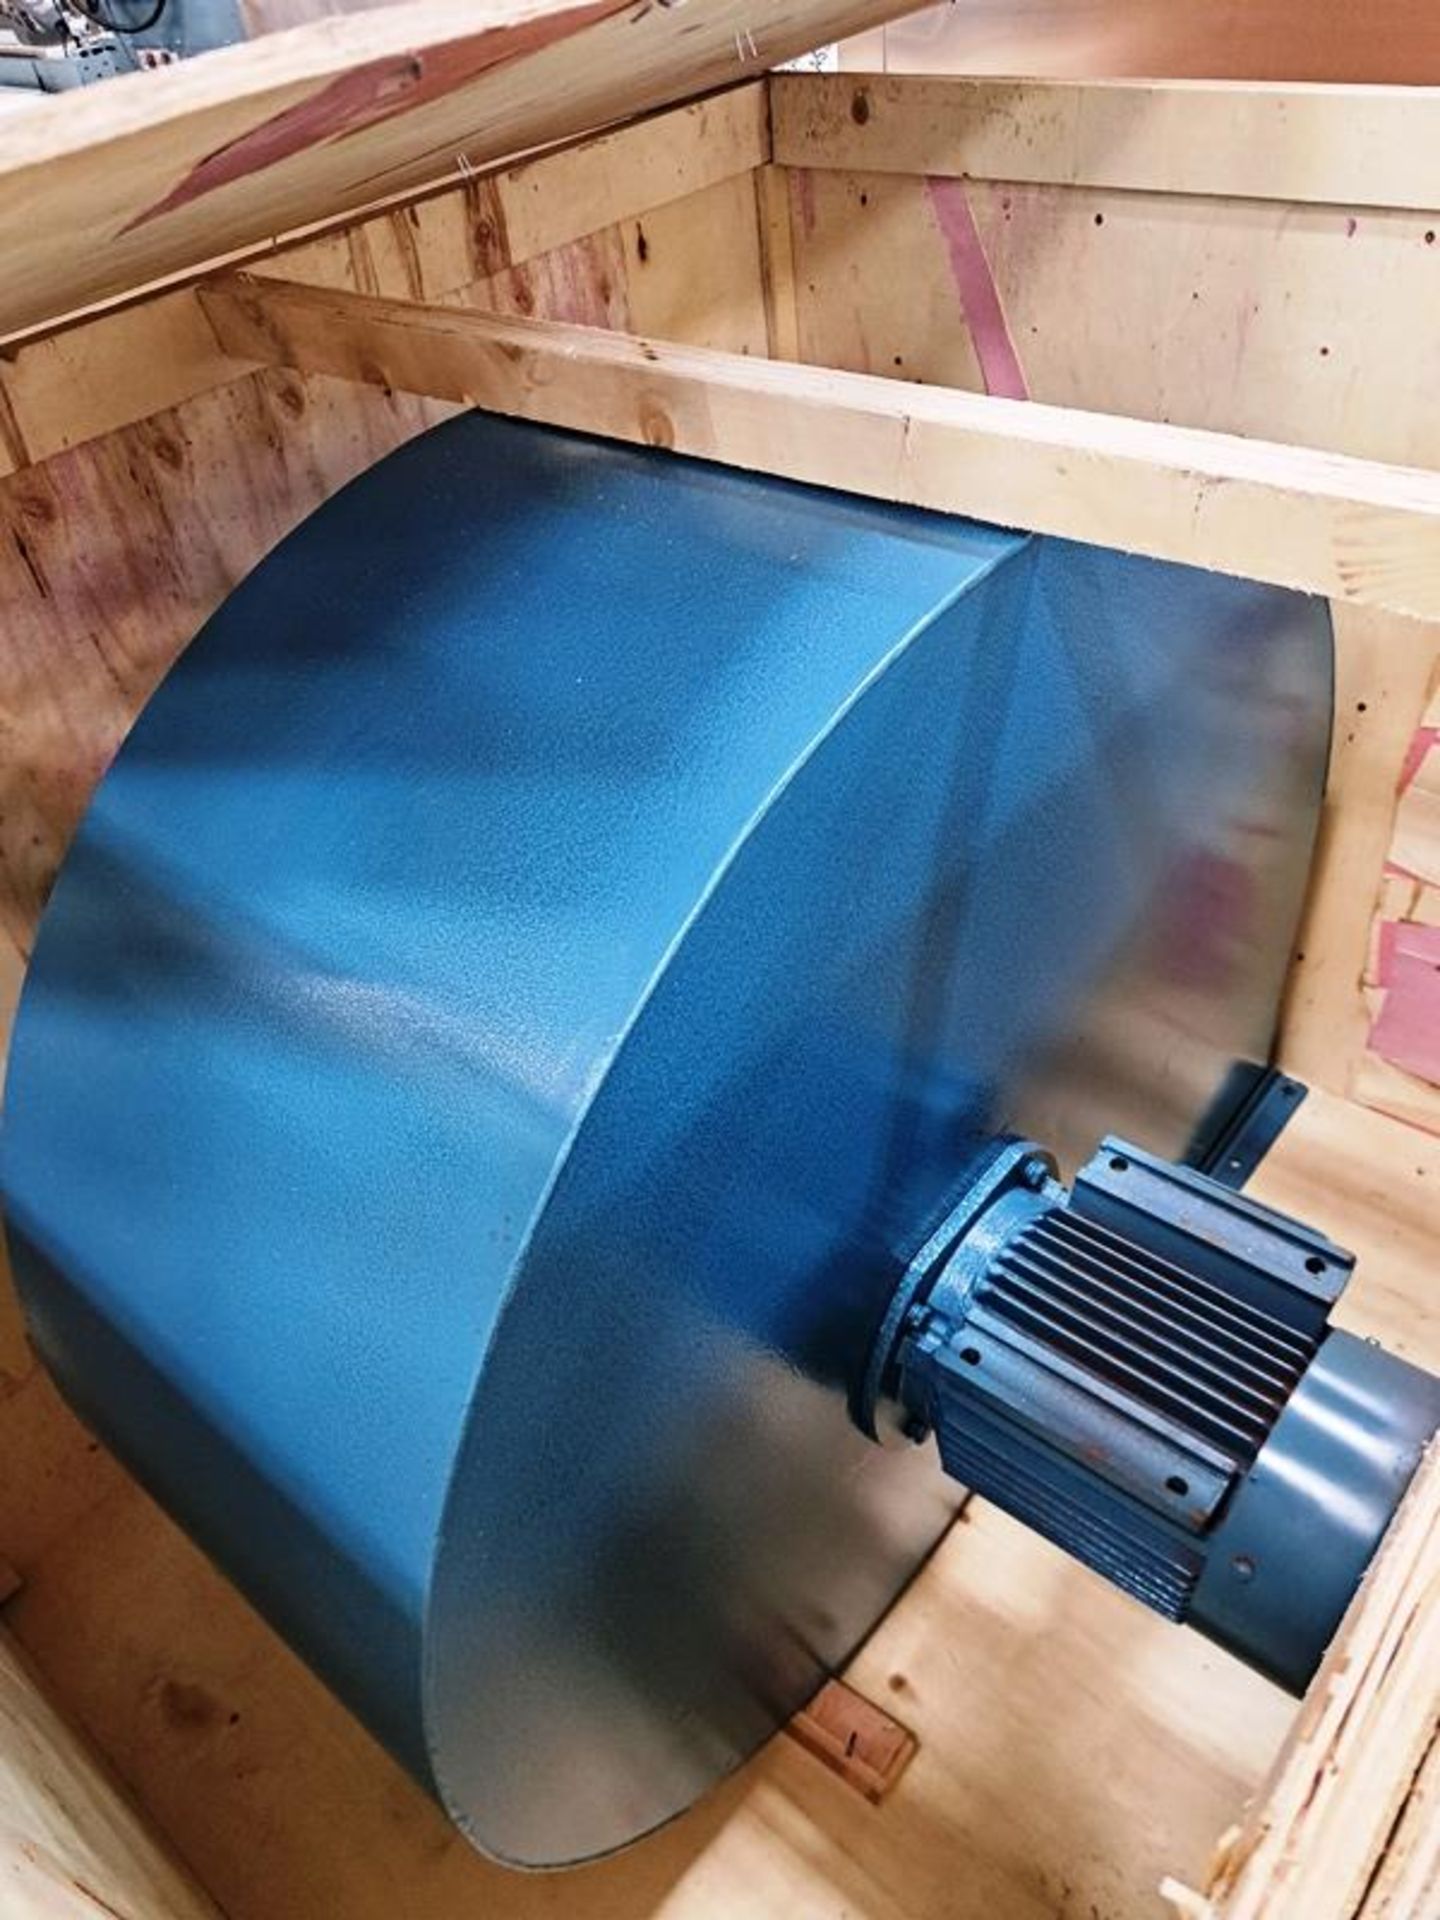 Centrifugal Blower, 20" diameter fan (Required Loading Fee: $25.00) NO HAND CARRY (Price Is For